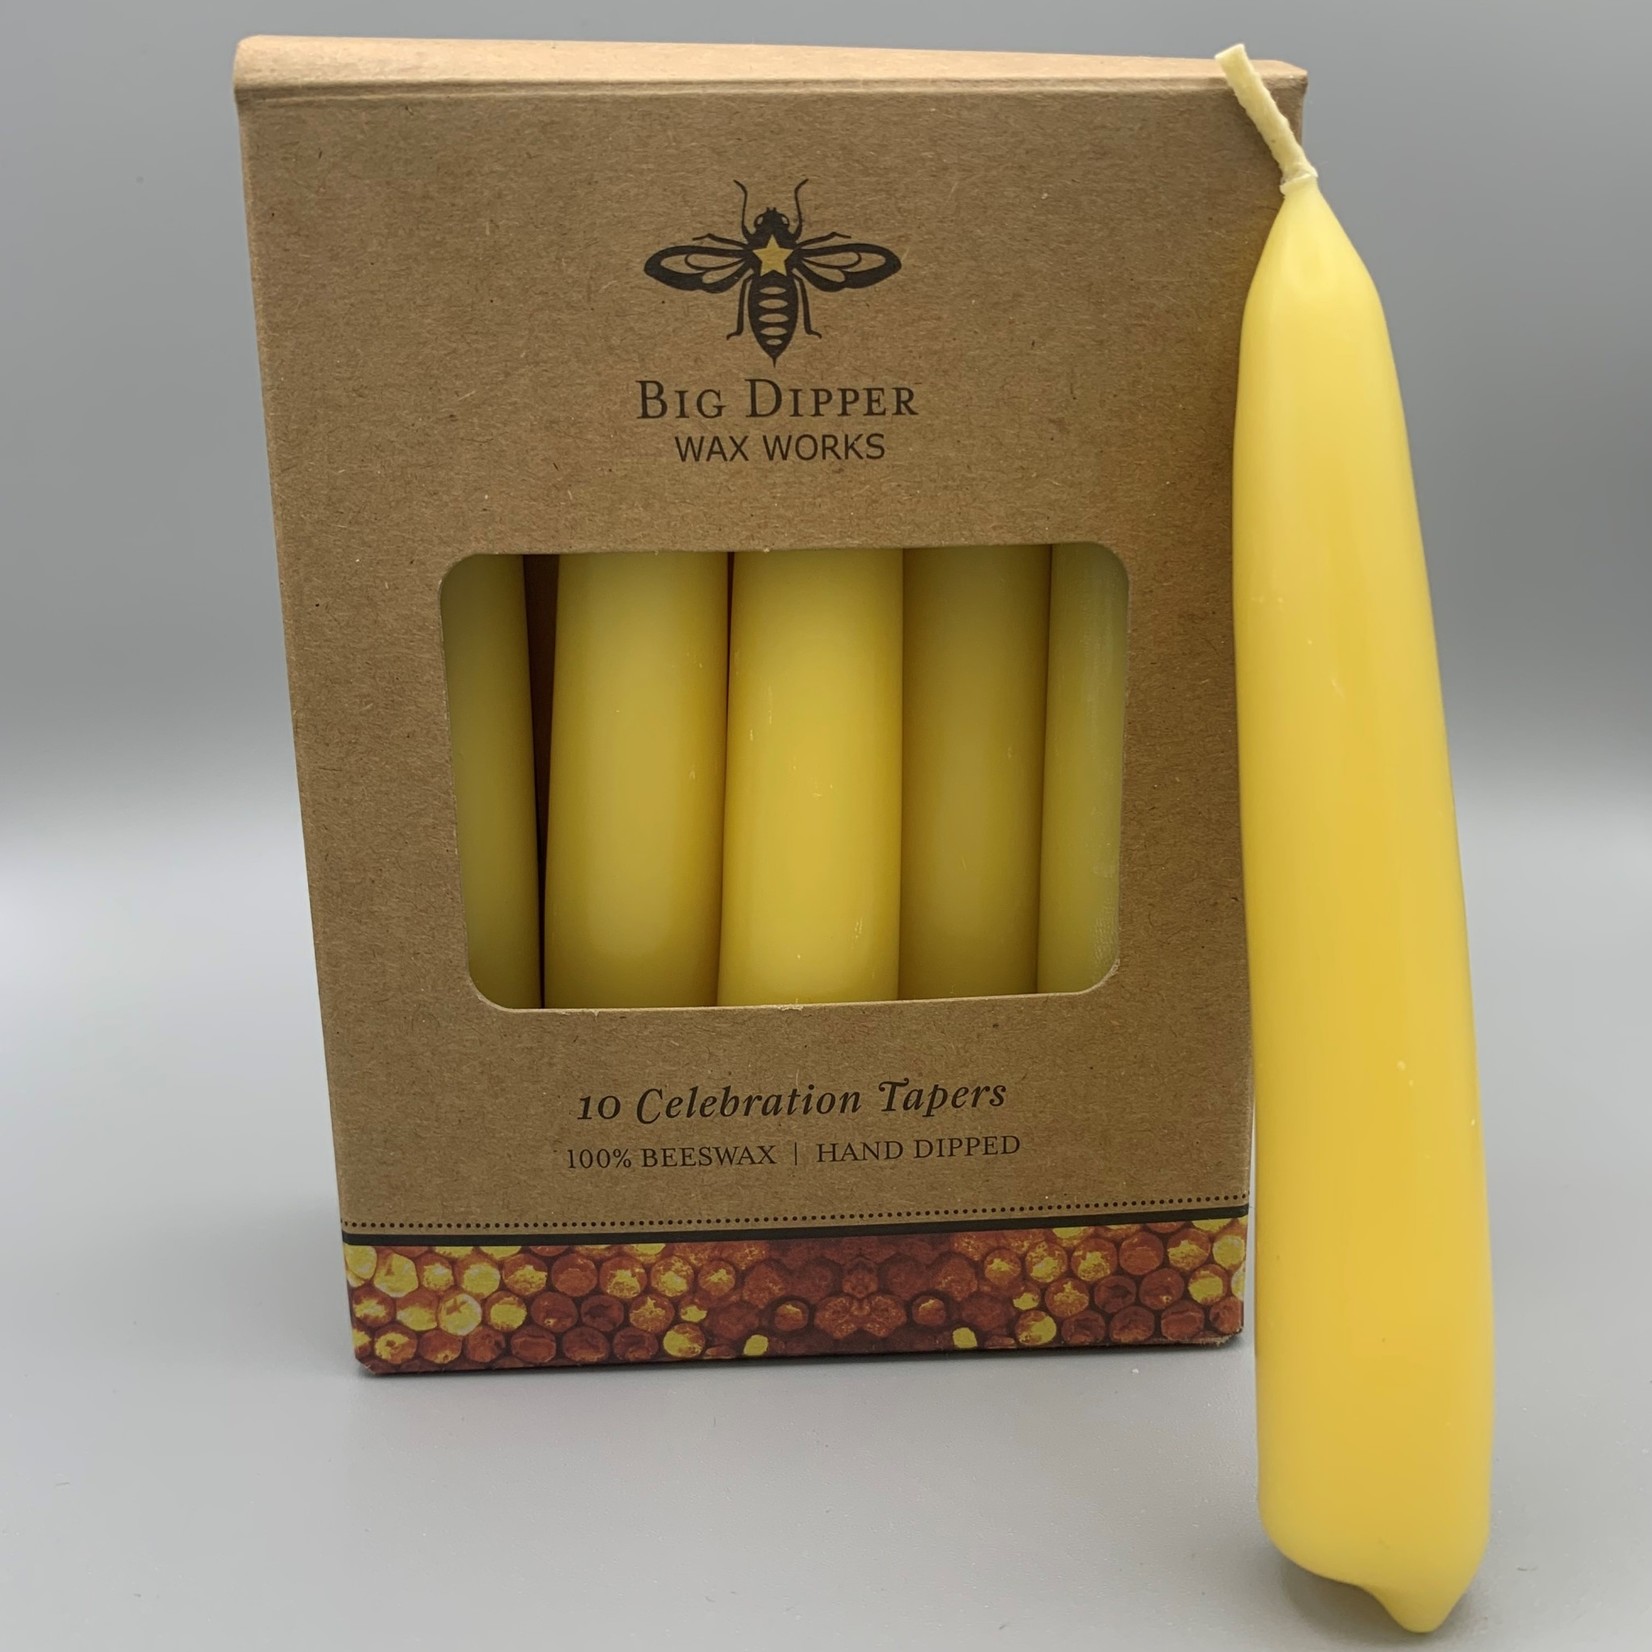 Big Dipper 100% Beeswax Celebration Tapers